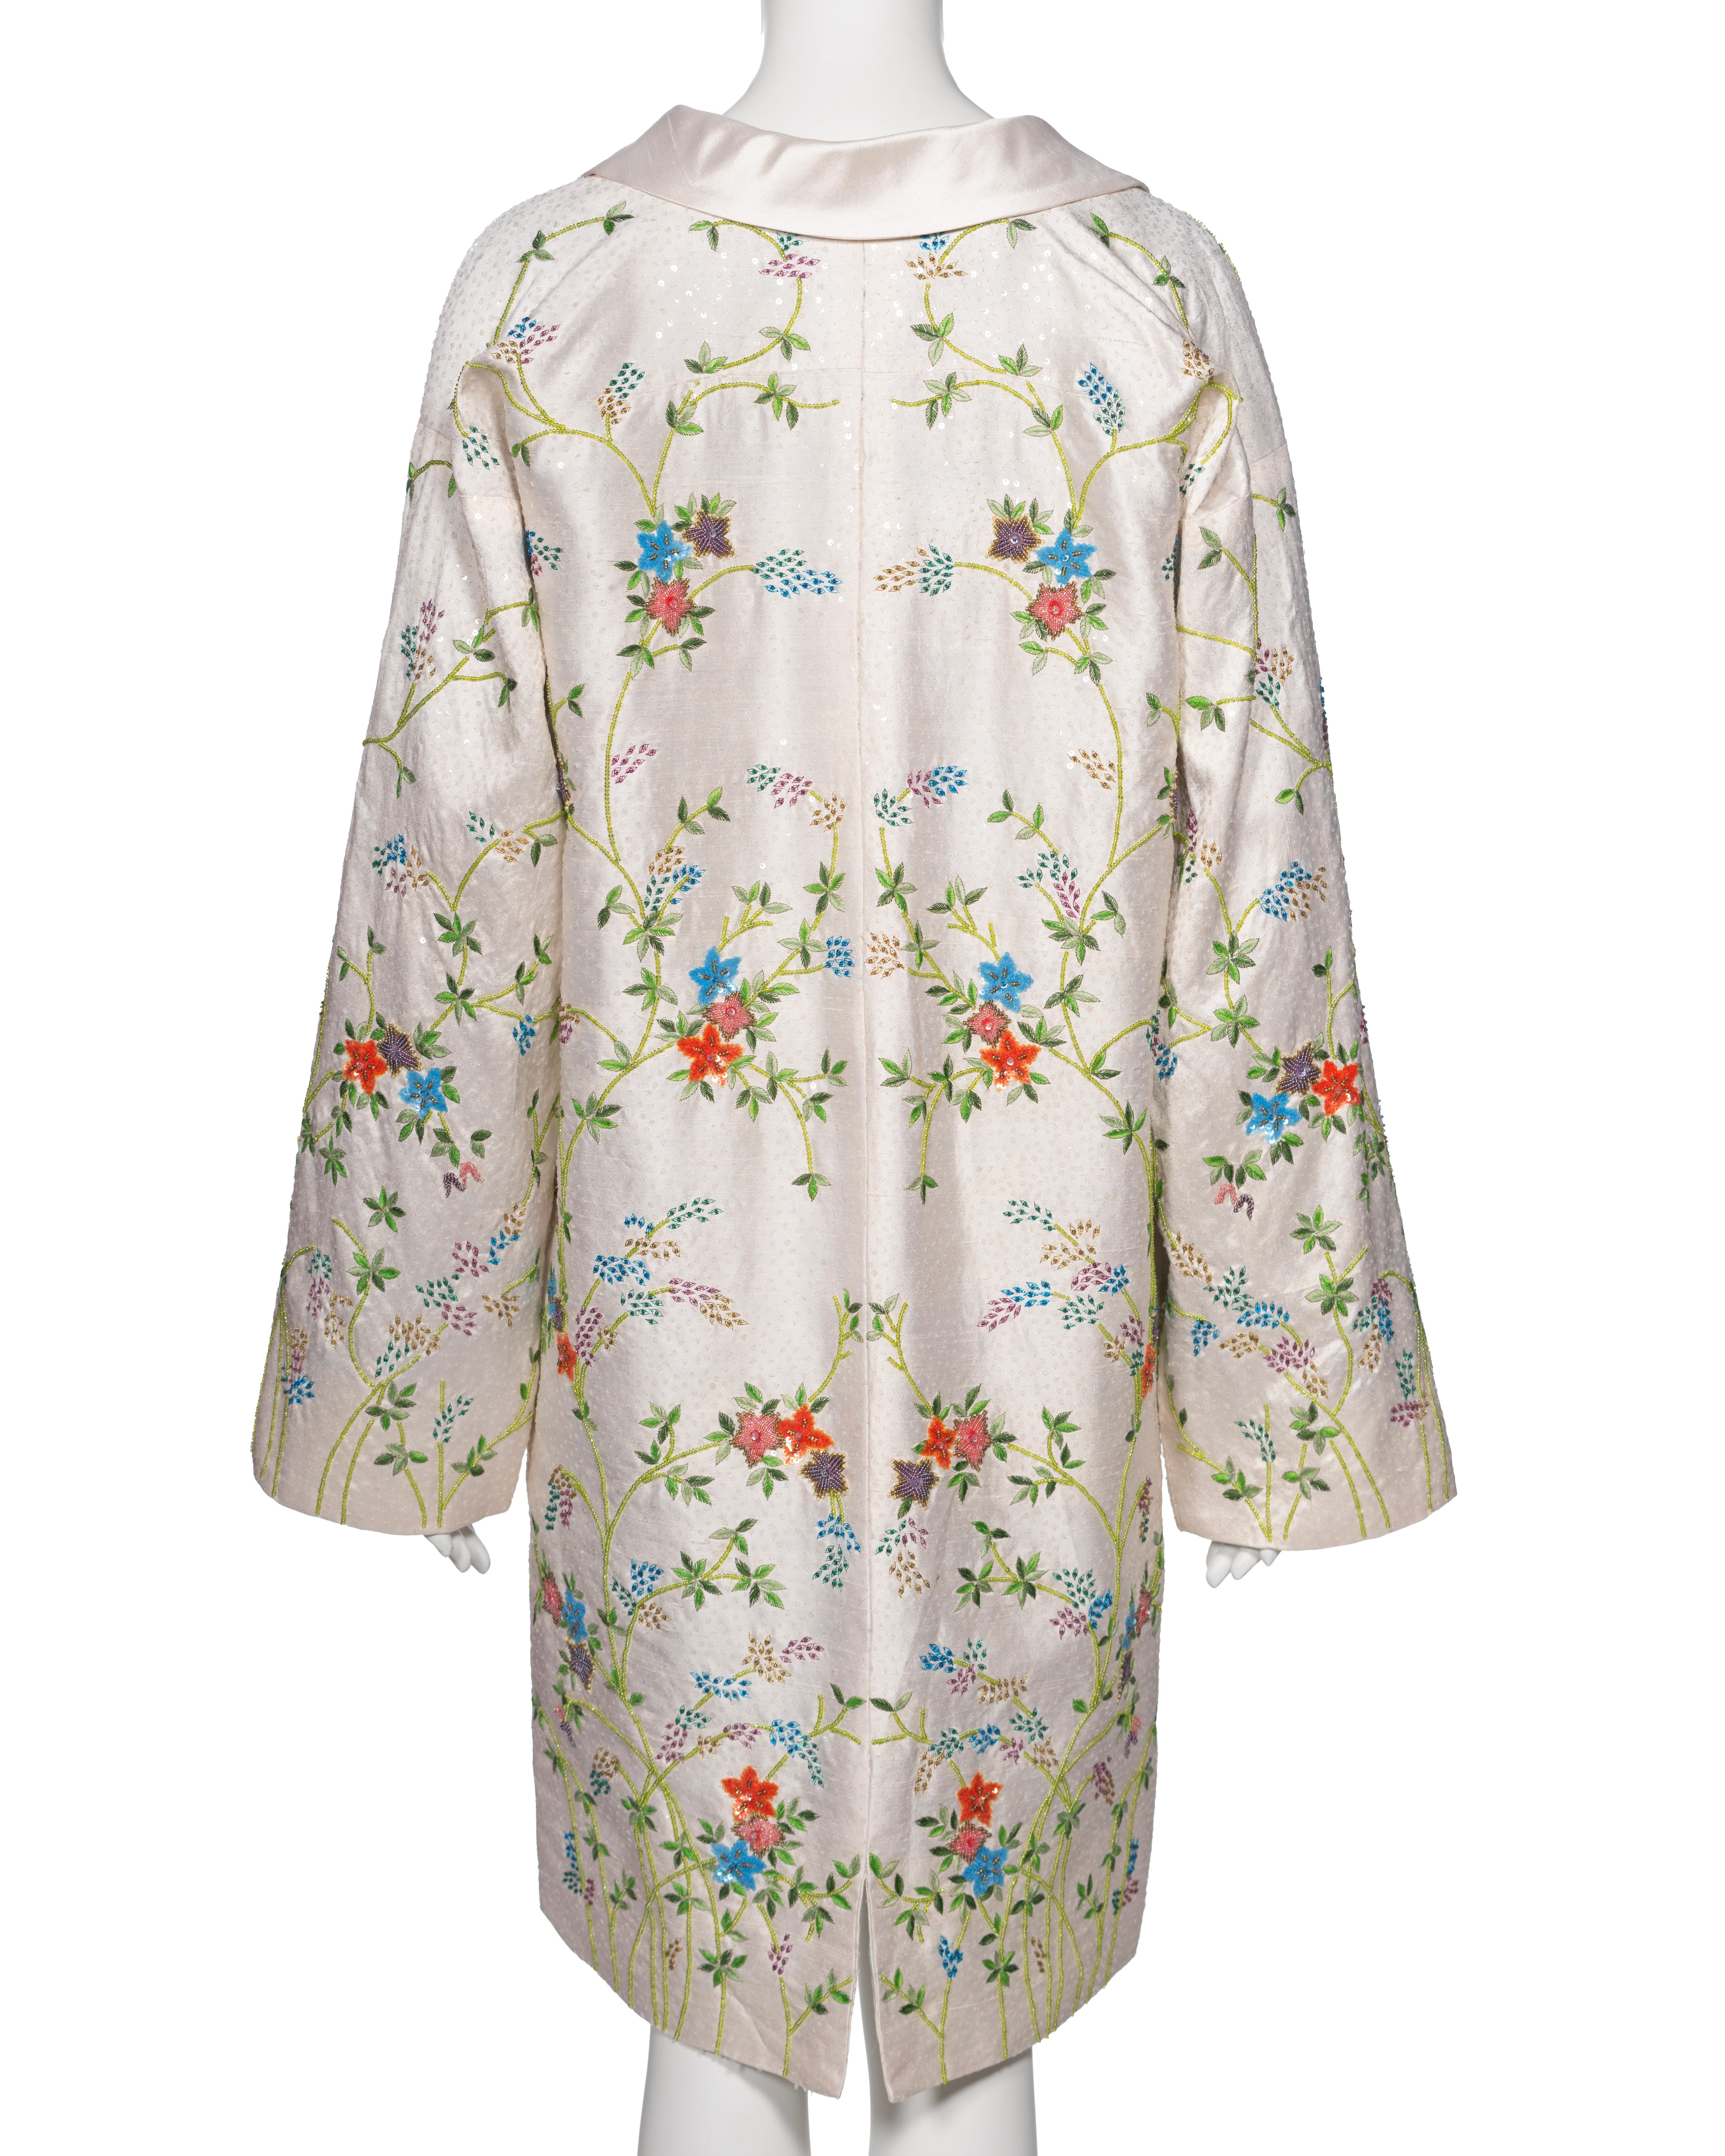 Dolce & Gabbana Hand-Embroidered White Raw Silk Evening Couture Coat, ss 1997 For Sale 9